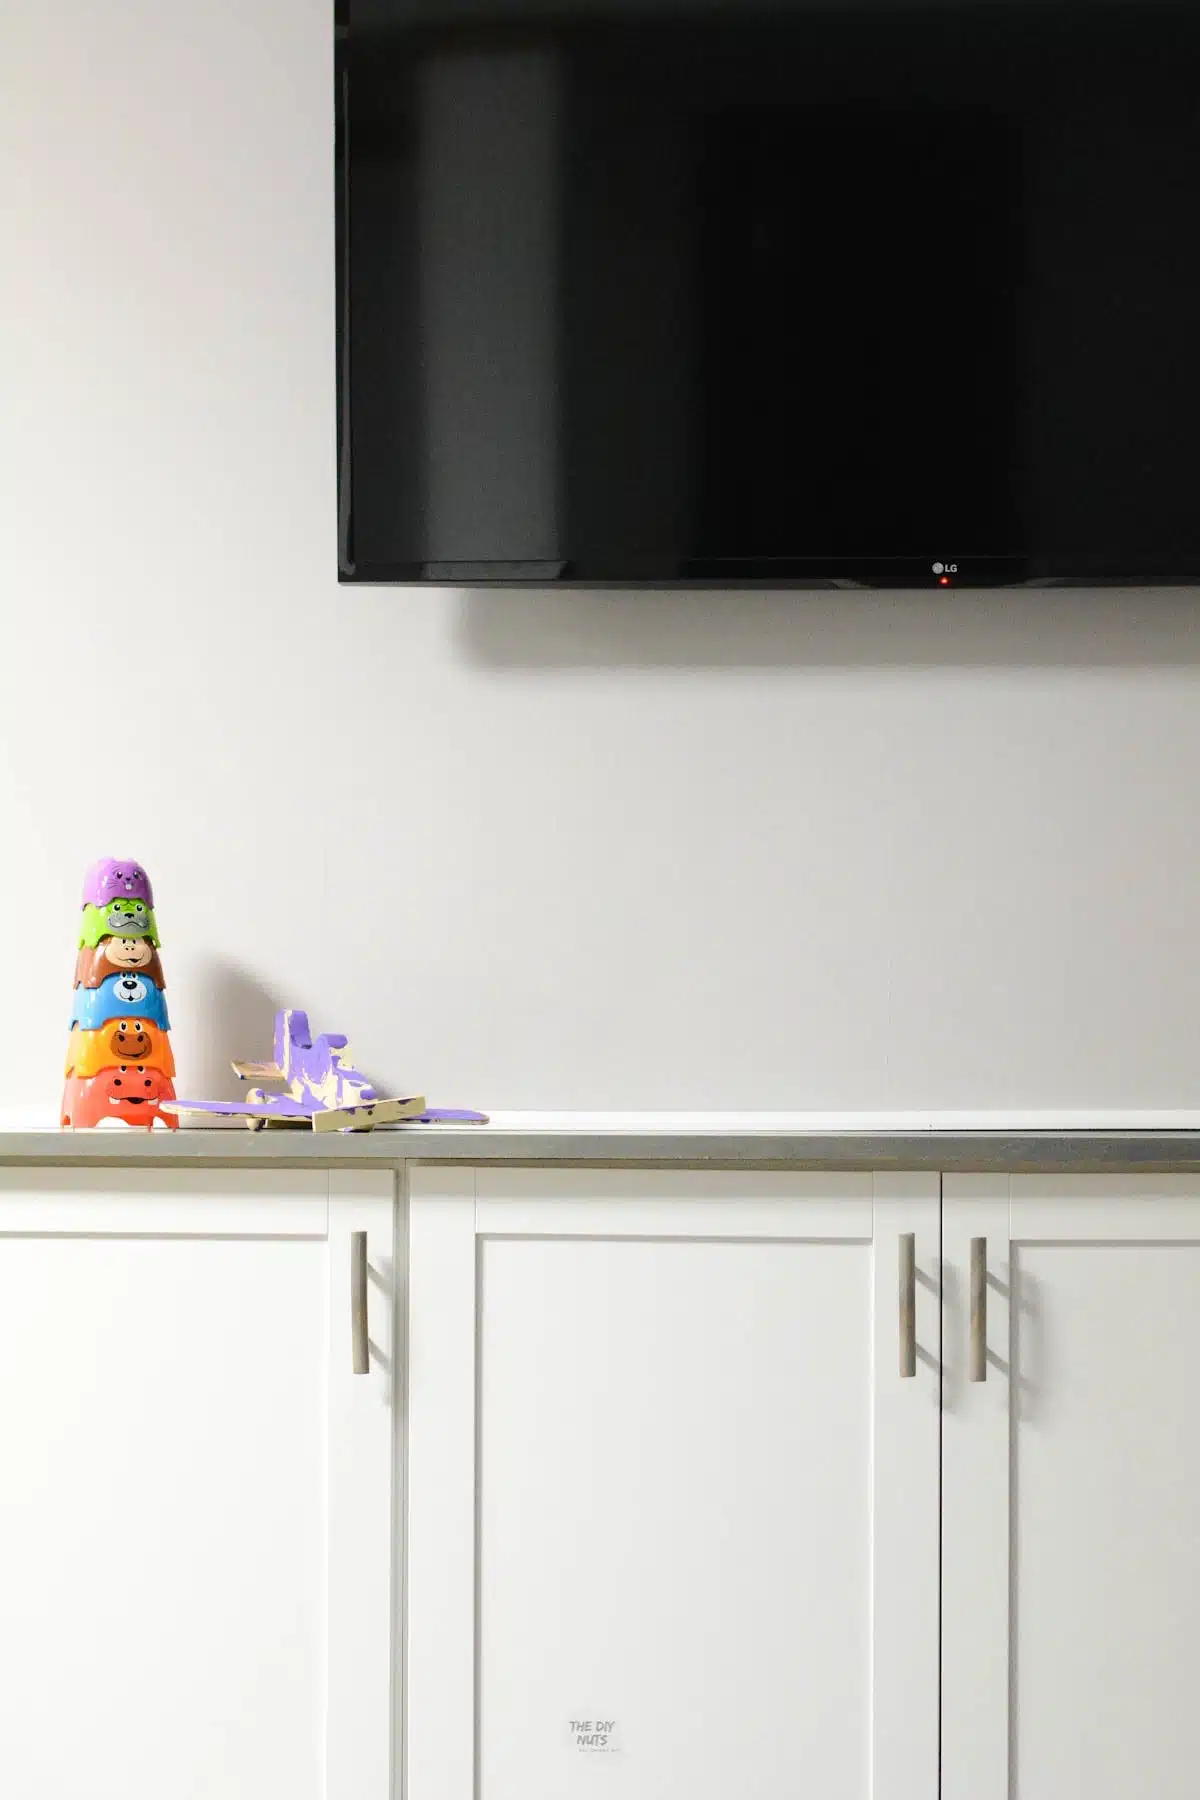 DIY Basement Makeover using white cabinets to create DIY built-ins below tv.